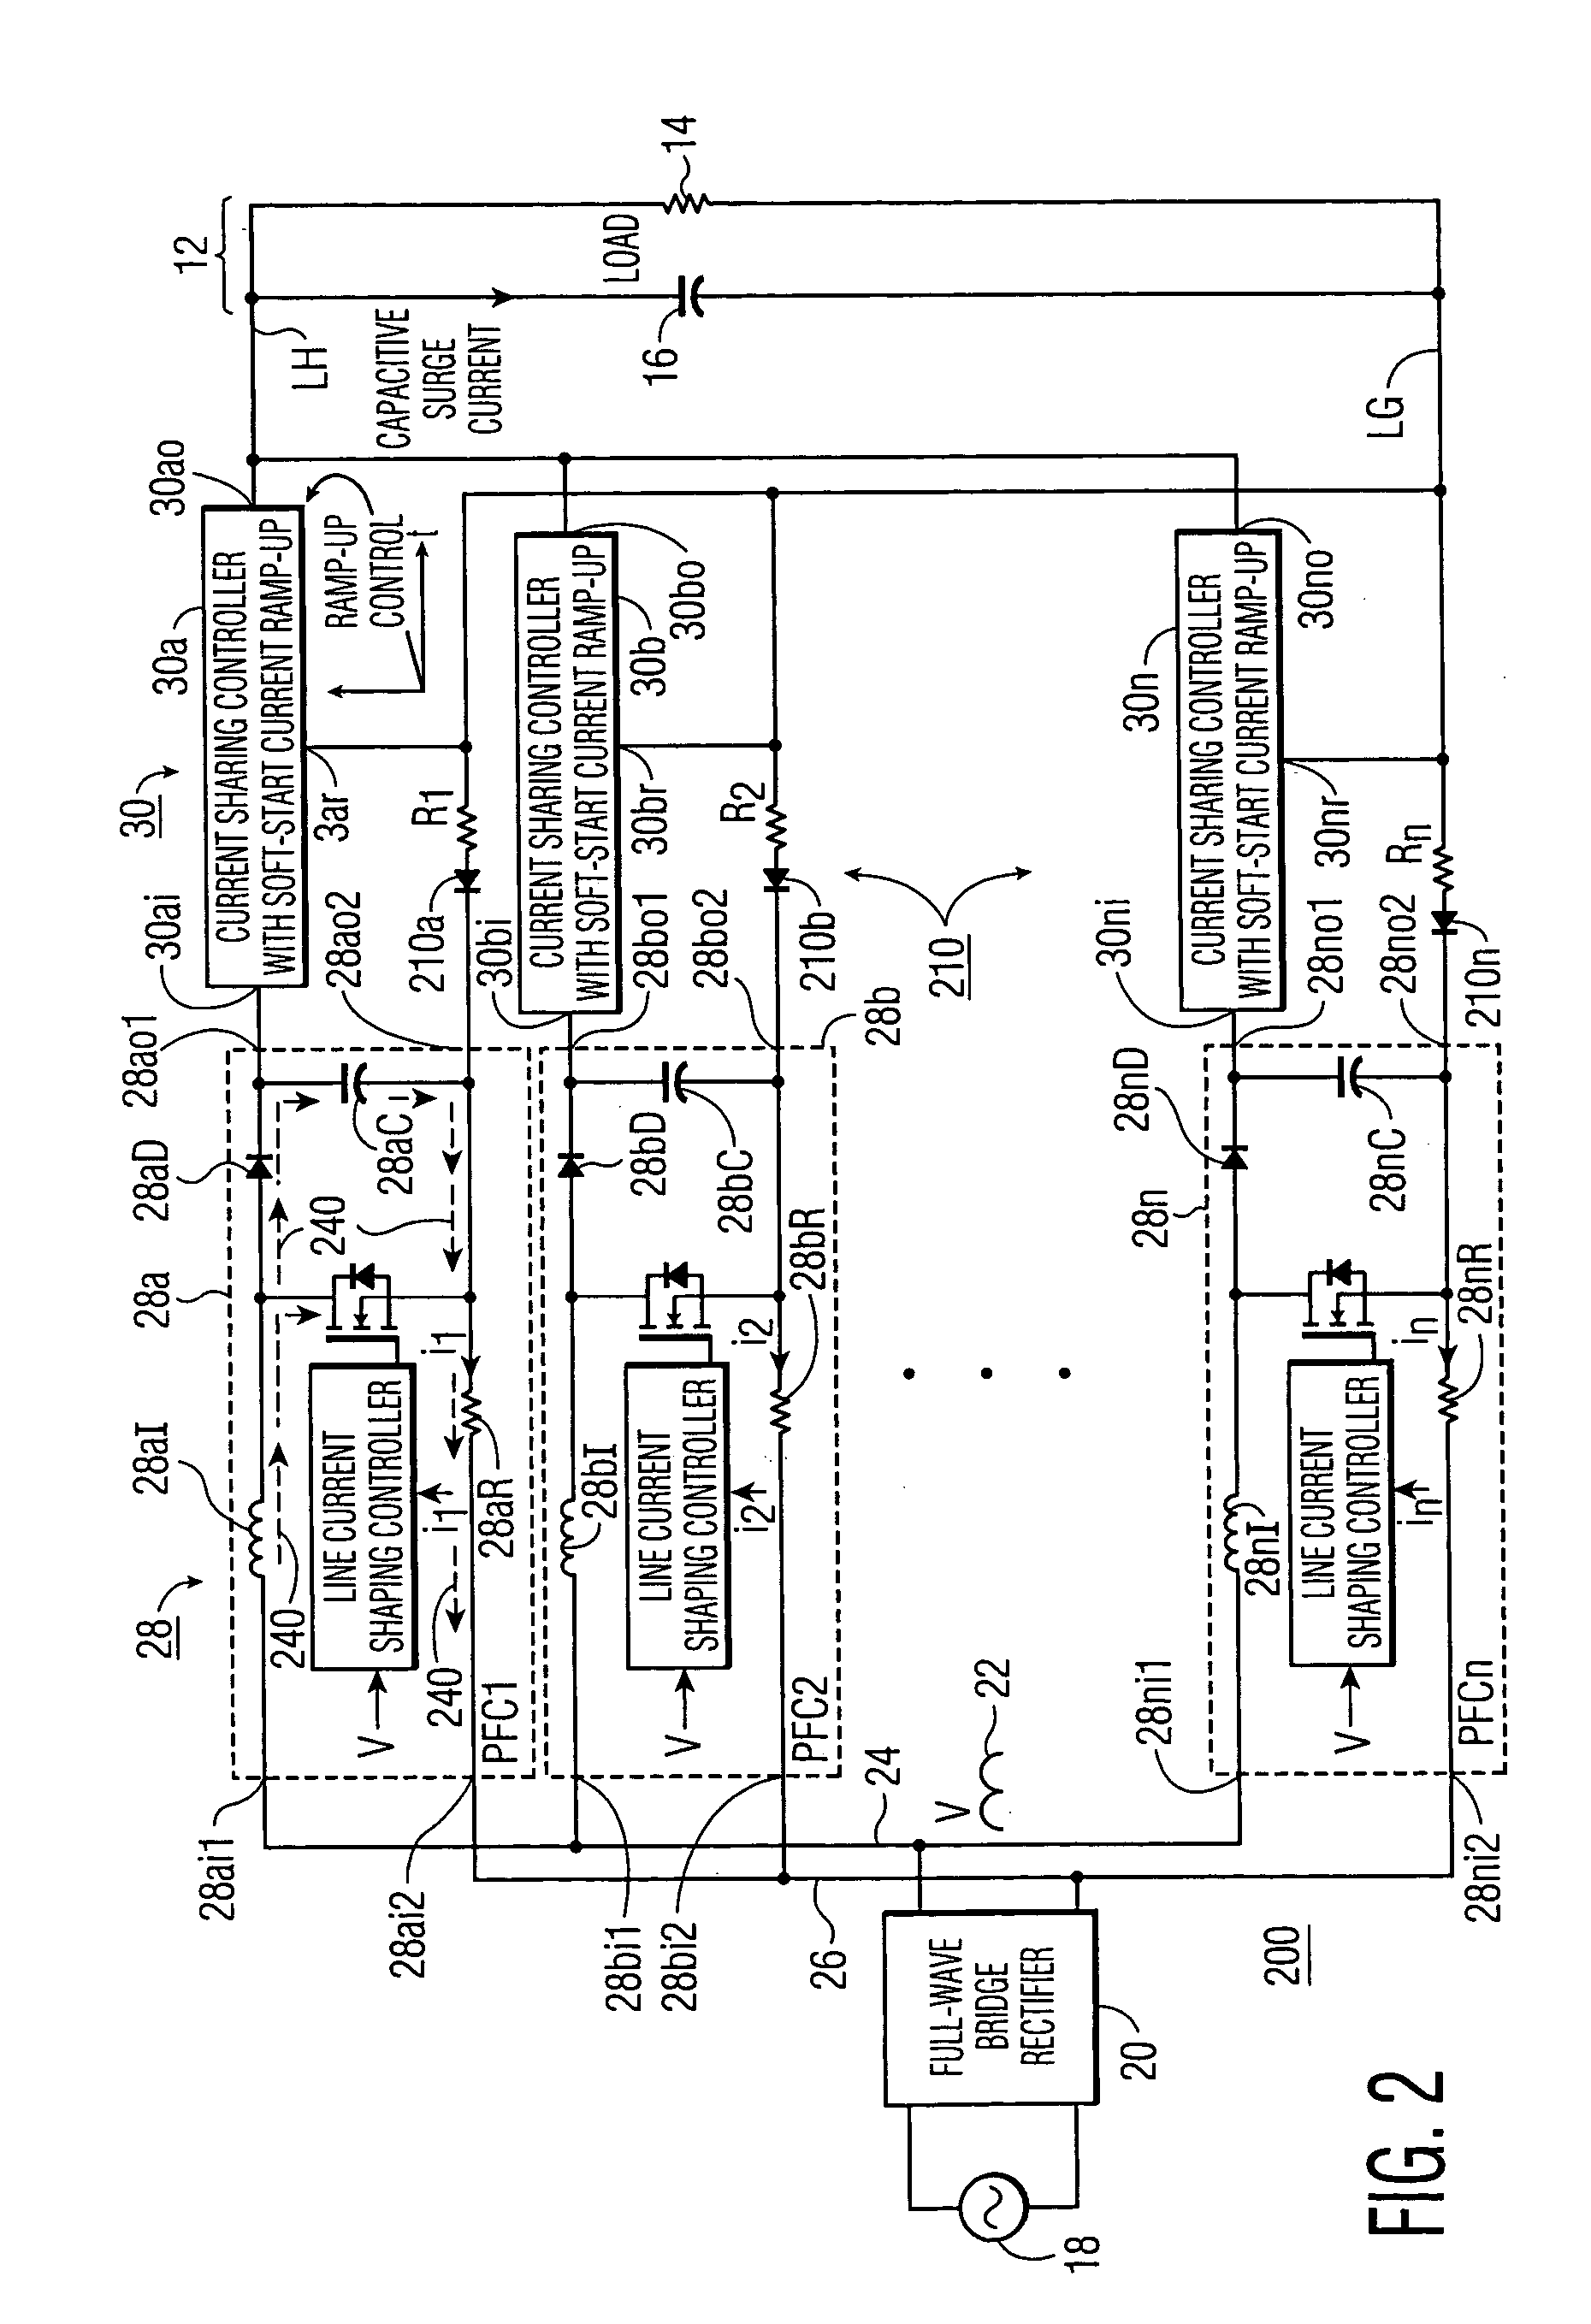 Surge current suppression in power-factor-corrected AC-to-DC converter with capacitive load